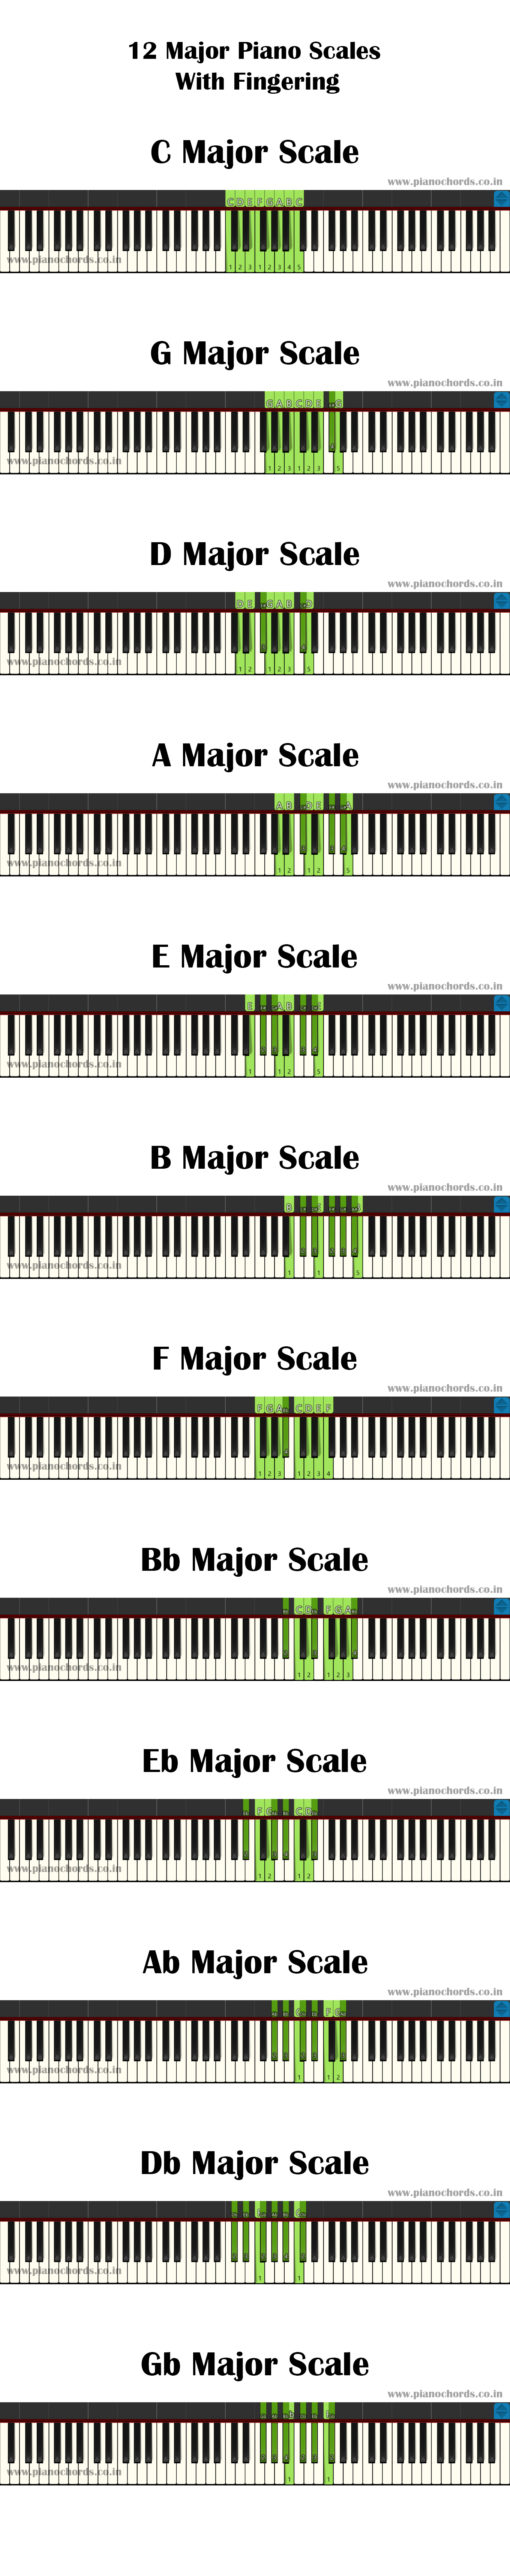 12 Major Piano Scales With Fingering